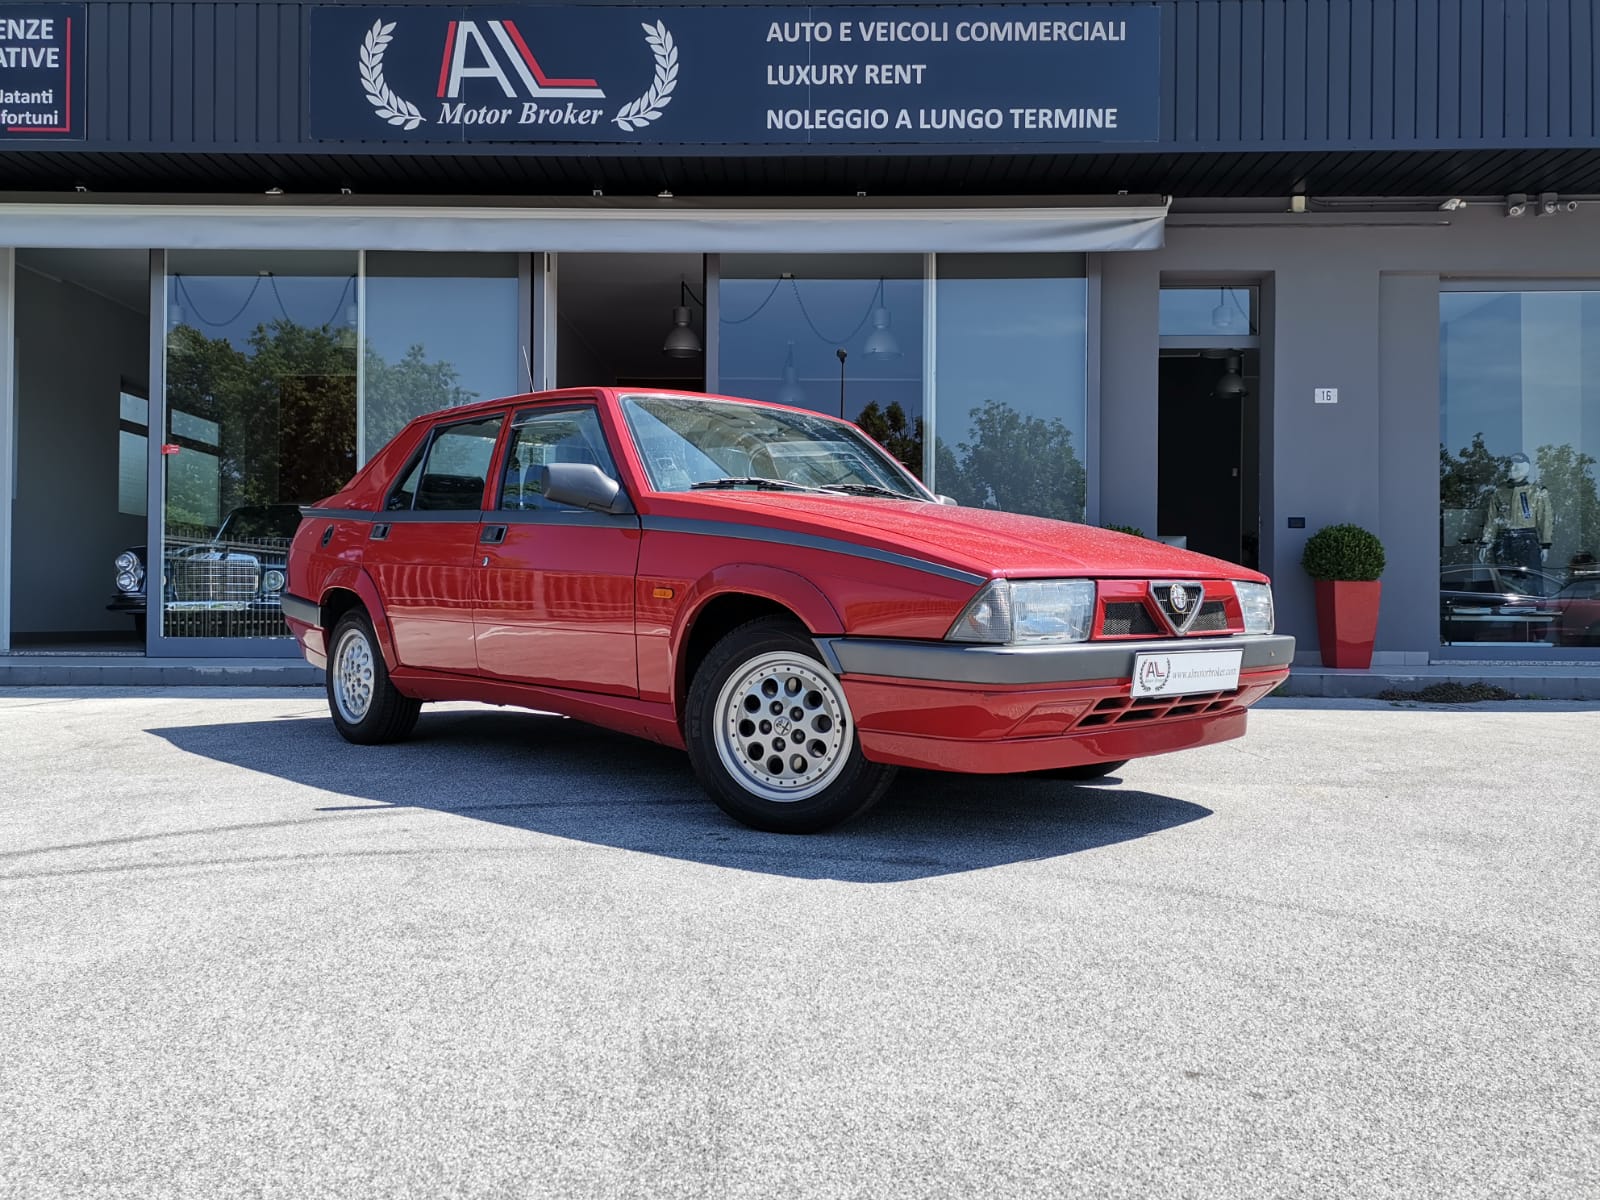 1989 Alfa Romeo 75 2.0 Twin Spark ^ One owner ^ Book Service